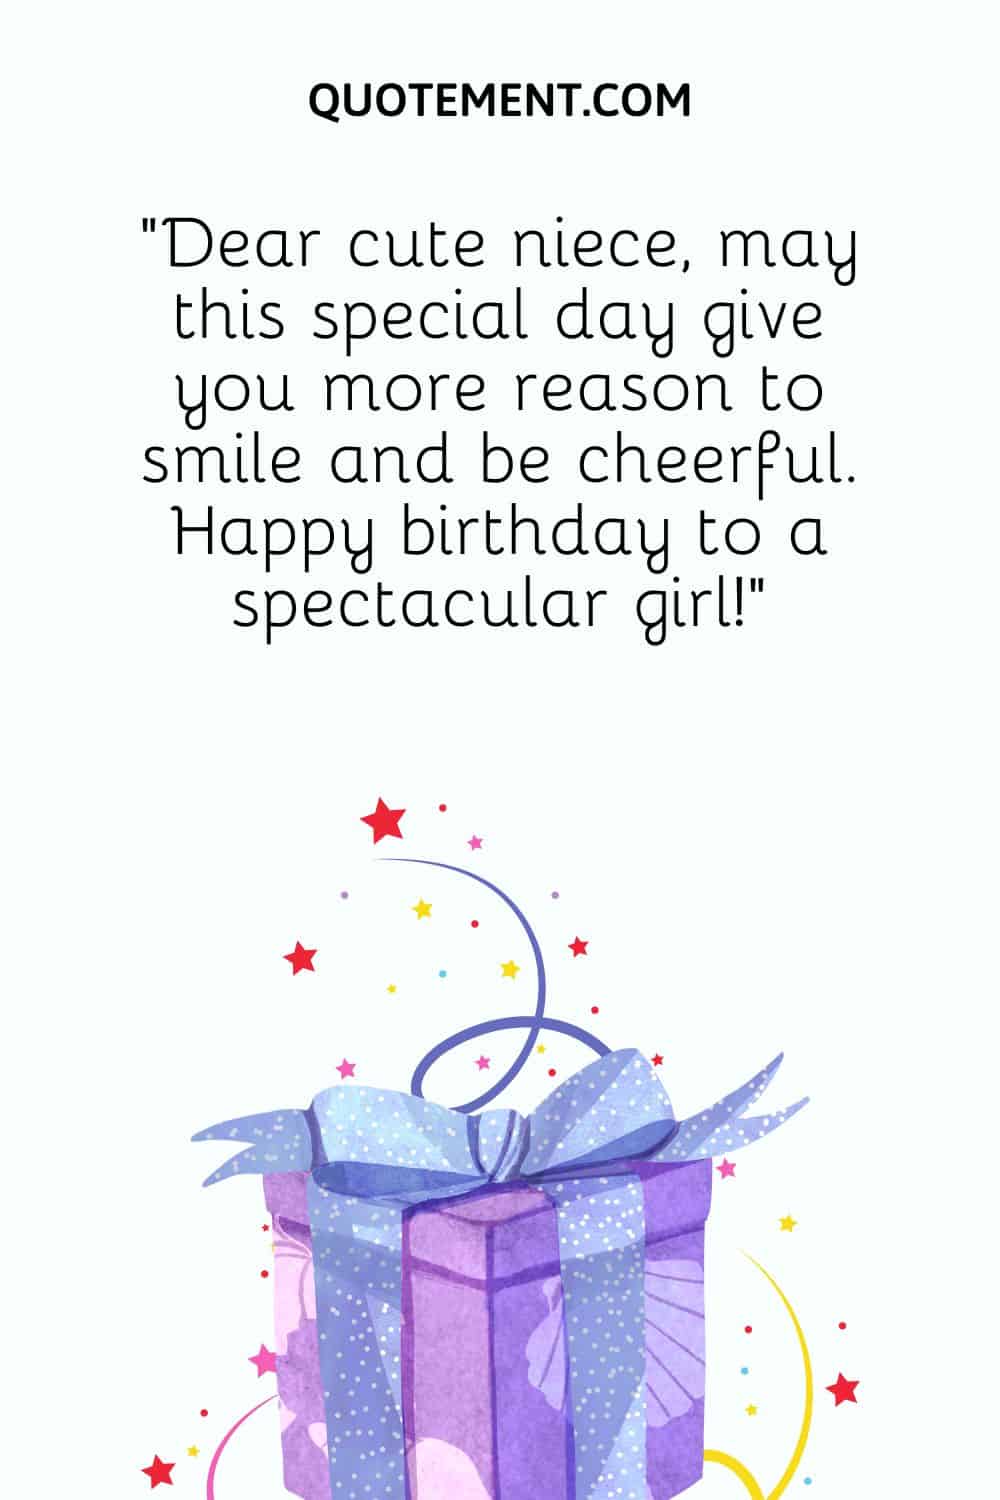 Dear cute niece, may this special day give you more reason to smile and be cheerful.